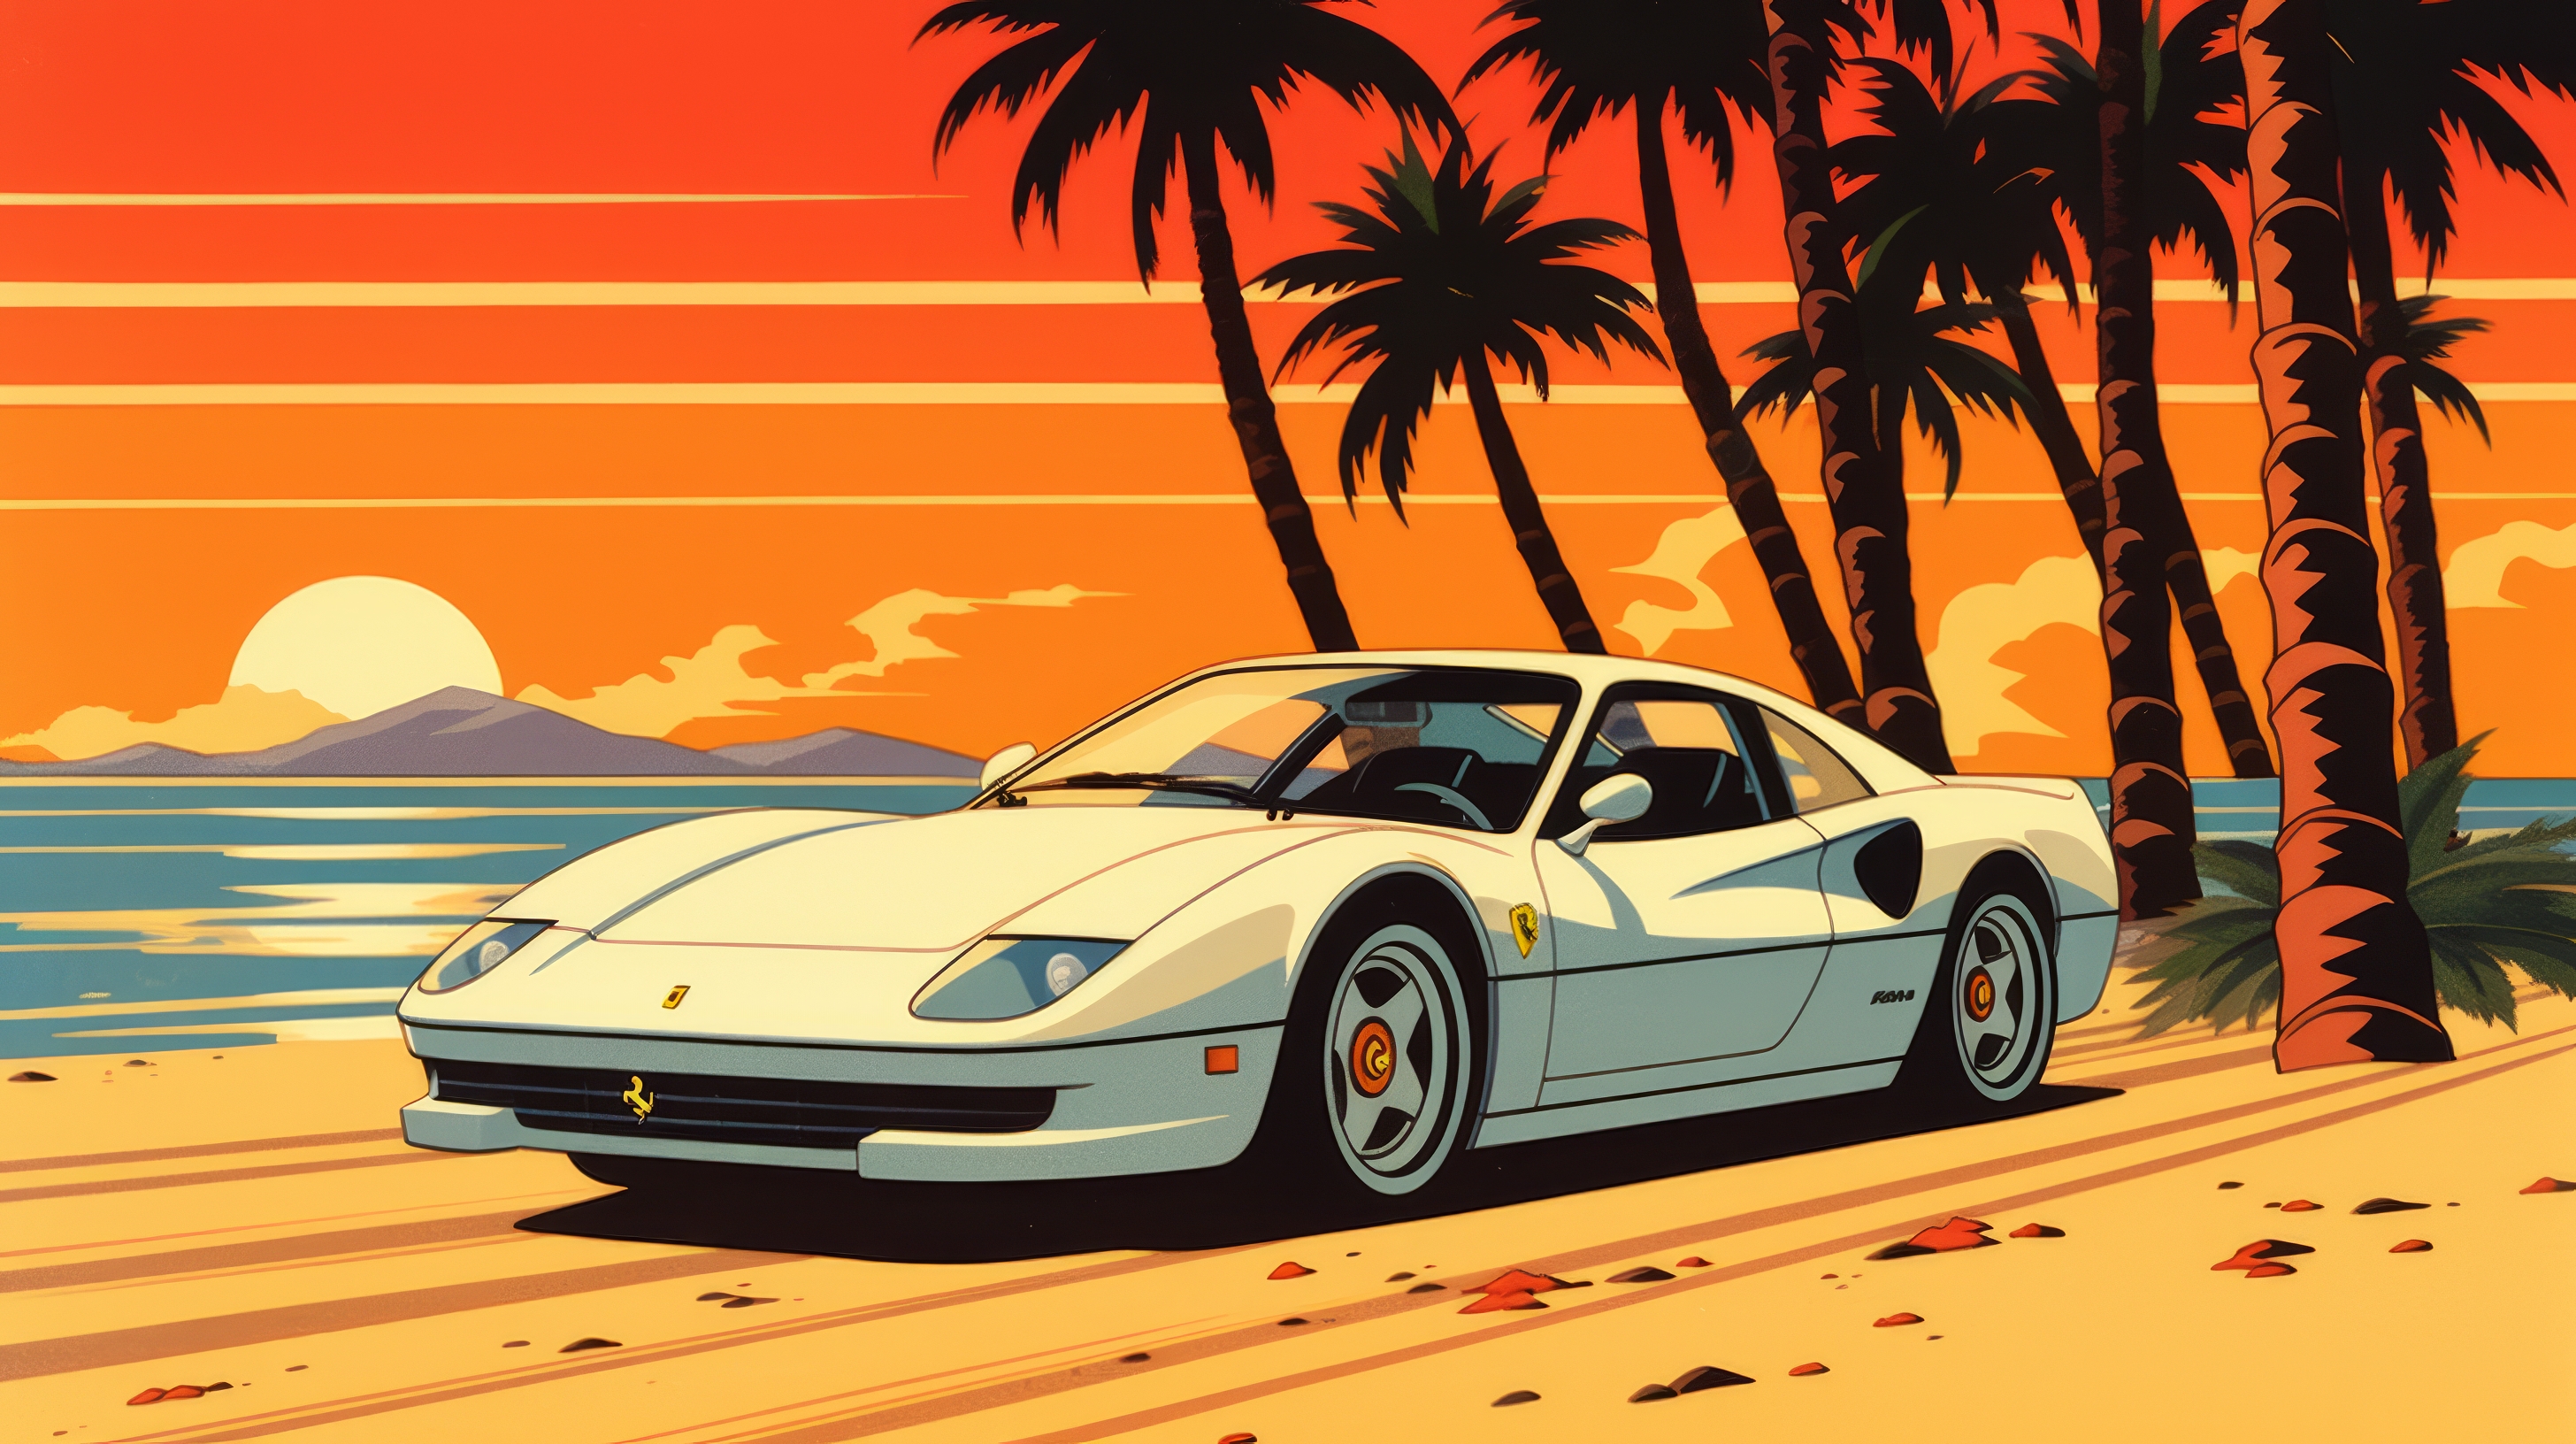 General 2912x1632 AI art sports car sunset palm trees 1980s postcard car frontal view water sunset glow mountains sand clouds sky digital art